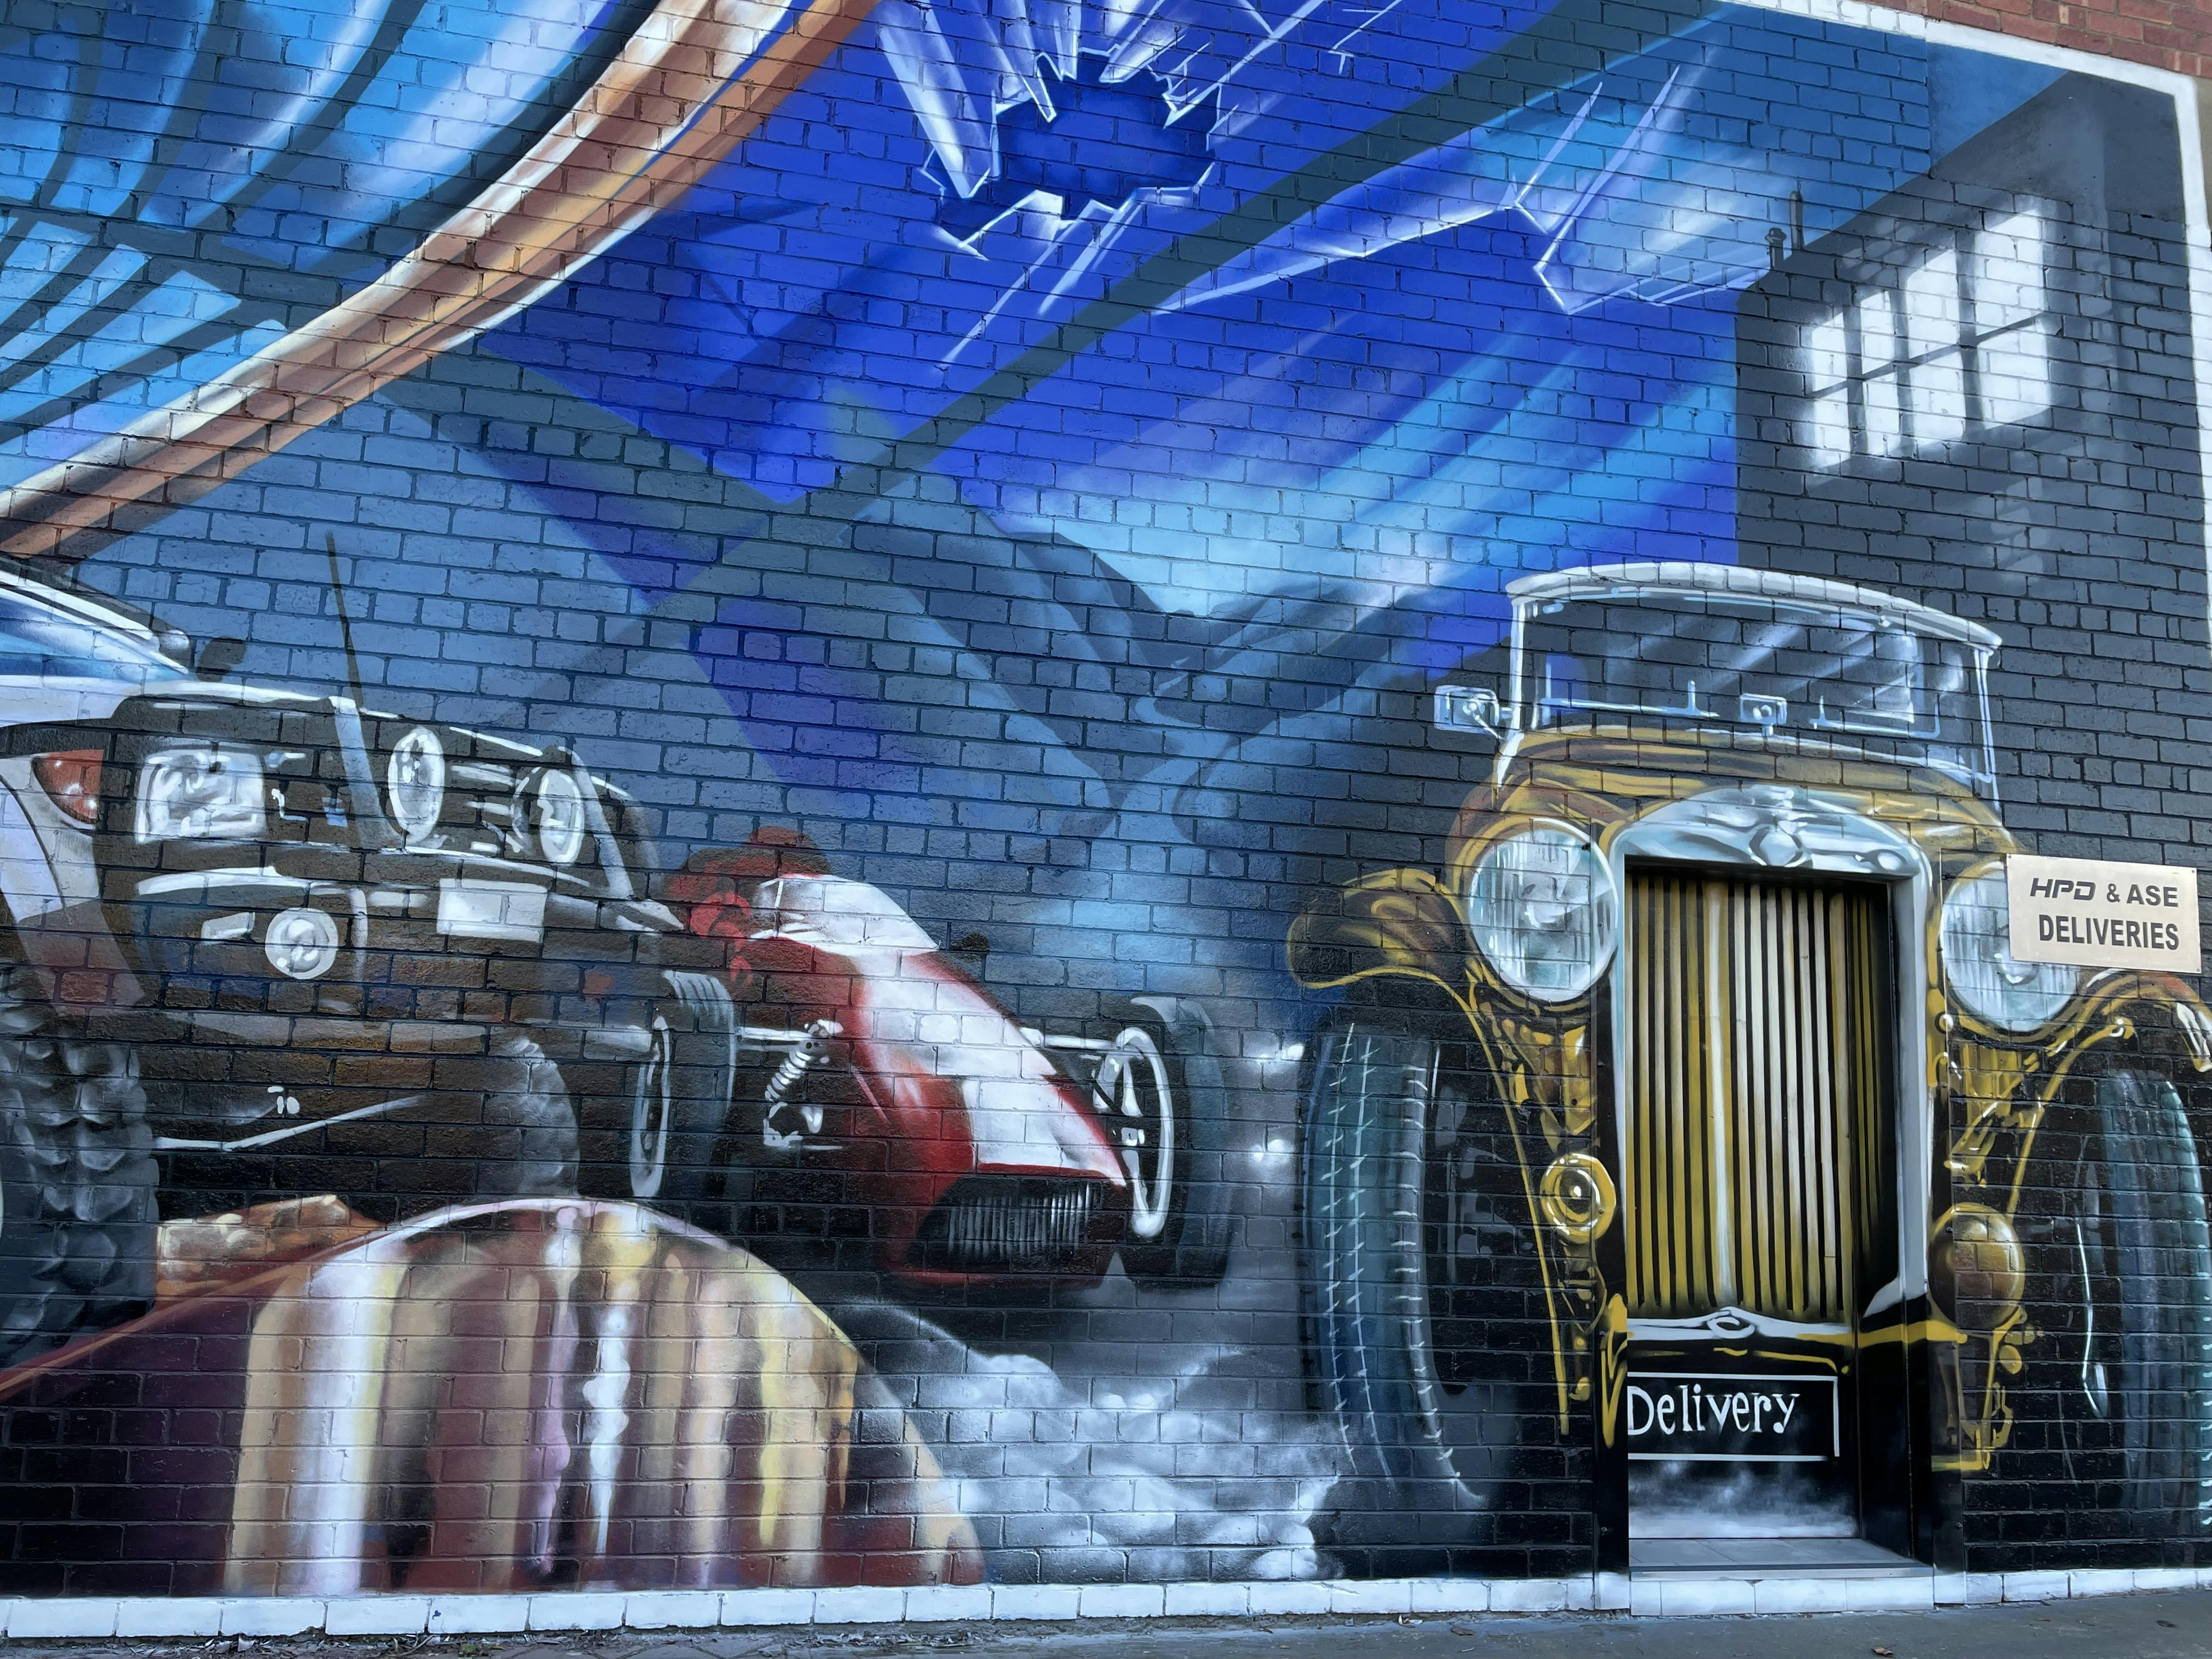 "Industrial Heritage of Edwardstown automotive mural" 2021.  Conmurra Avenue by Senman Creations. Commissioned by City of Marion